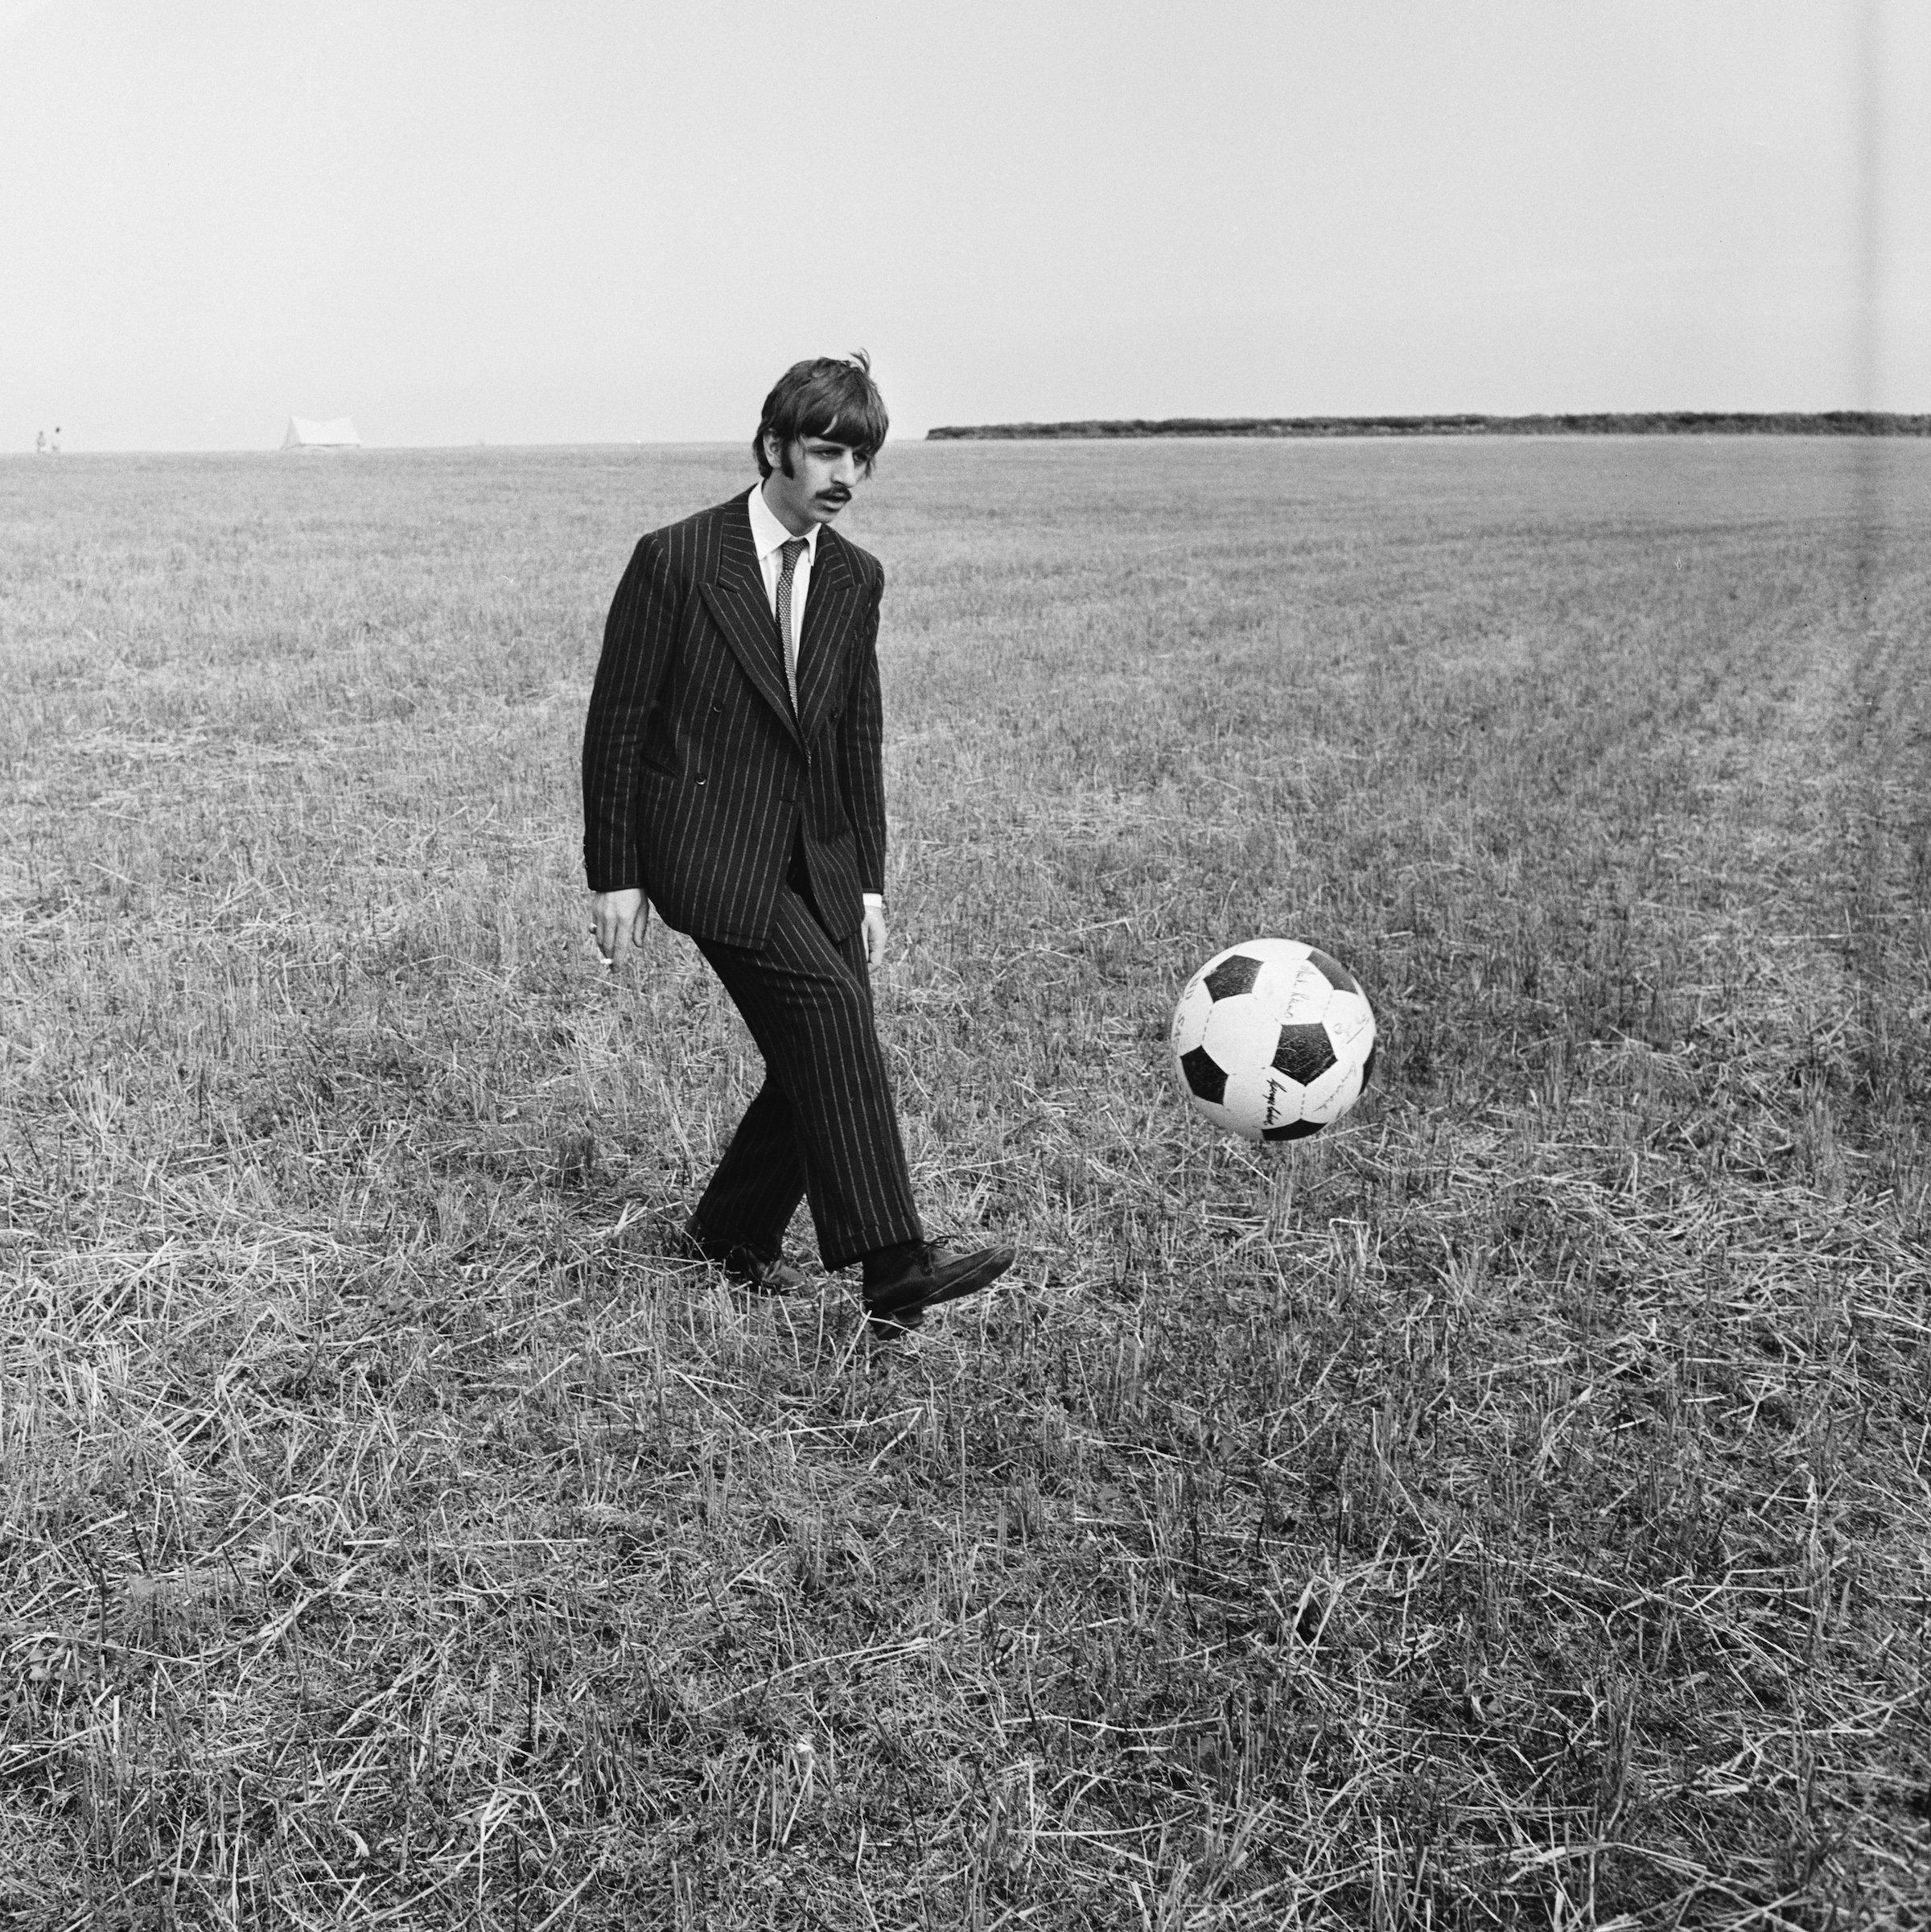 Ringo Starr, drummer with the Beatles, pictured kicking a soccer ball (football) during filming of 'Magical Mystery Tour'